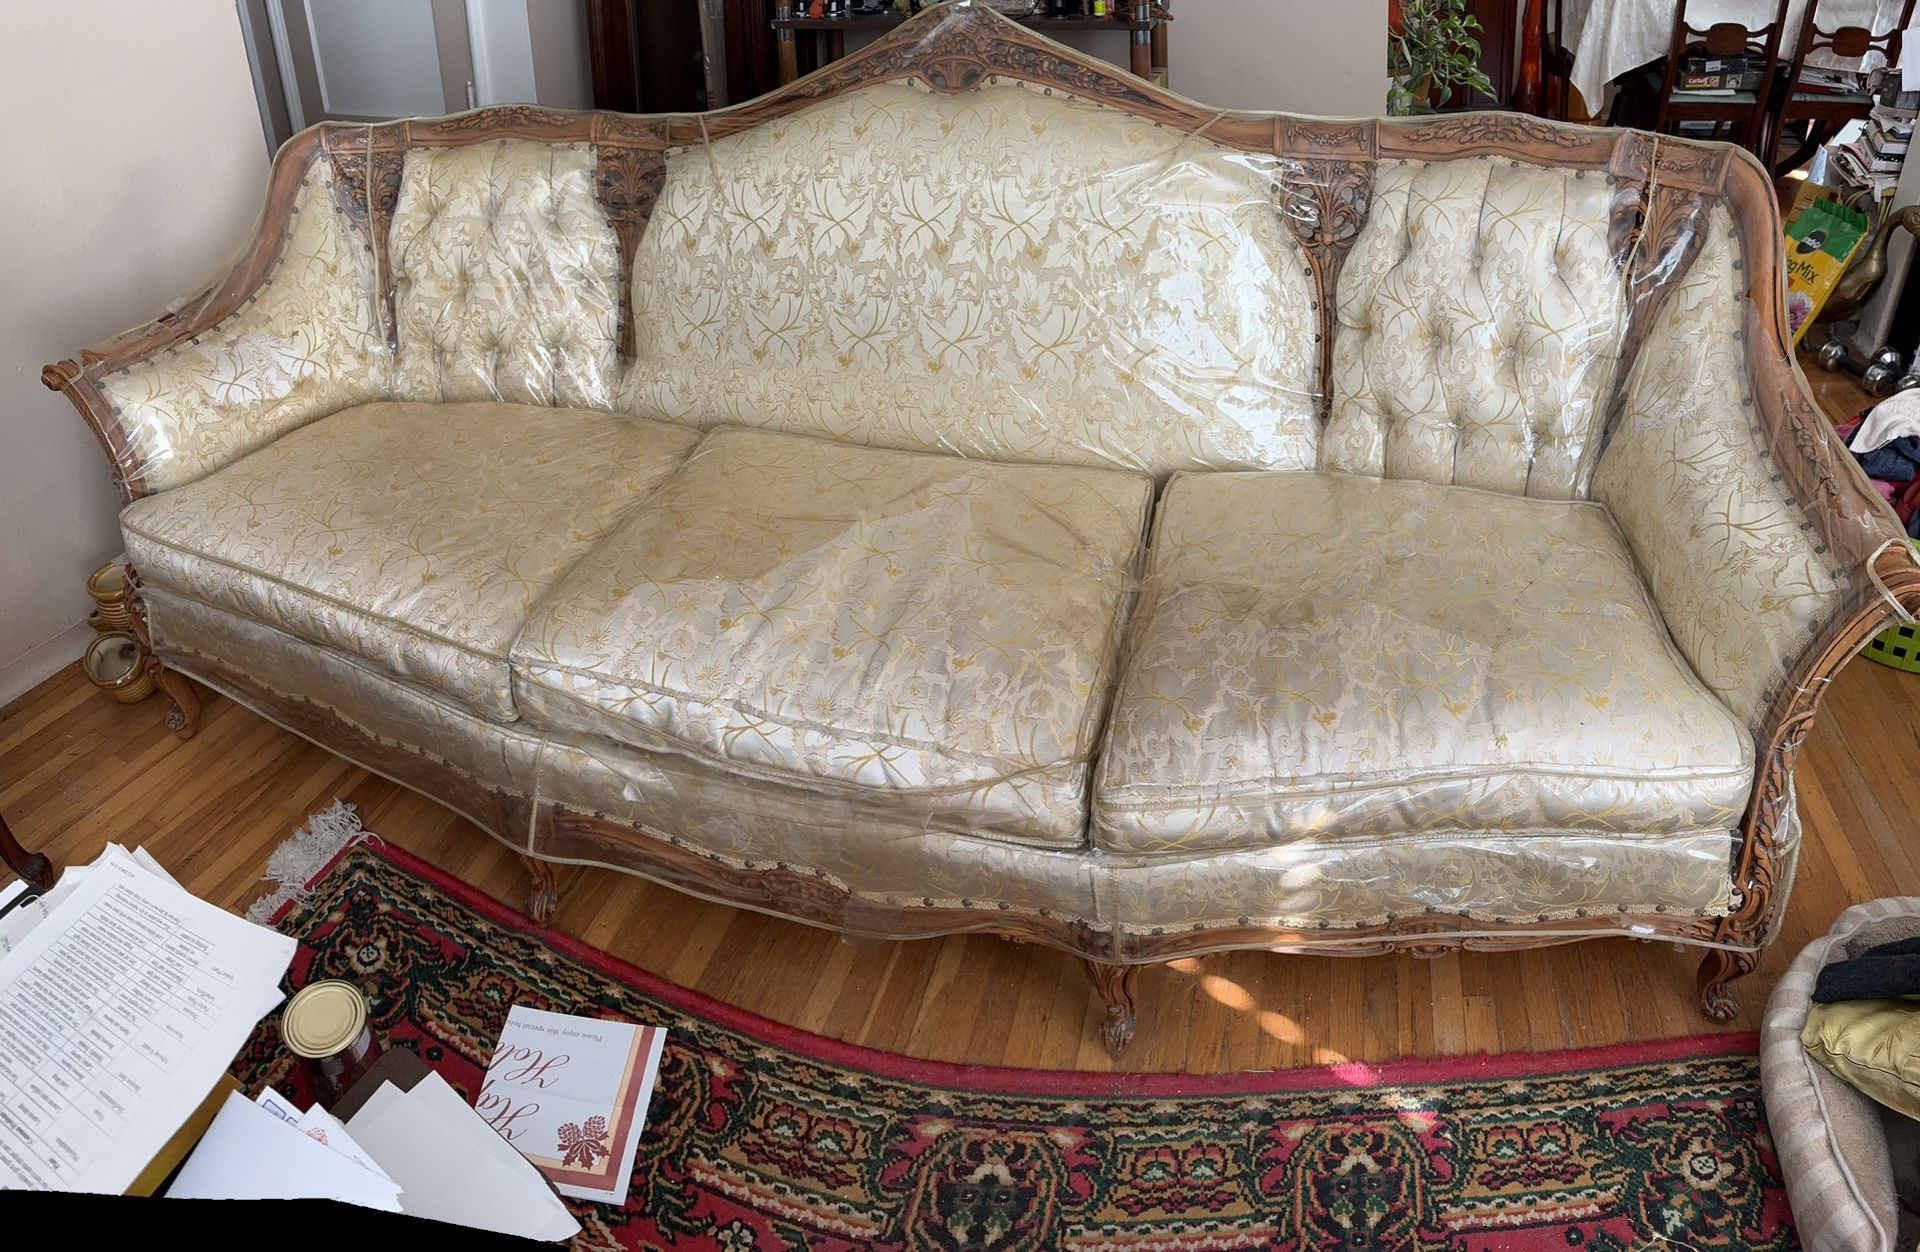 7’ Sofa And Matching Chair